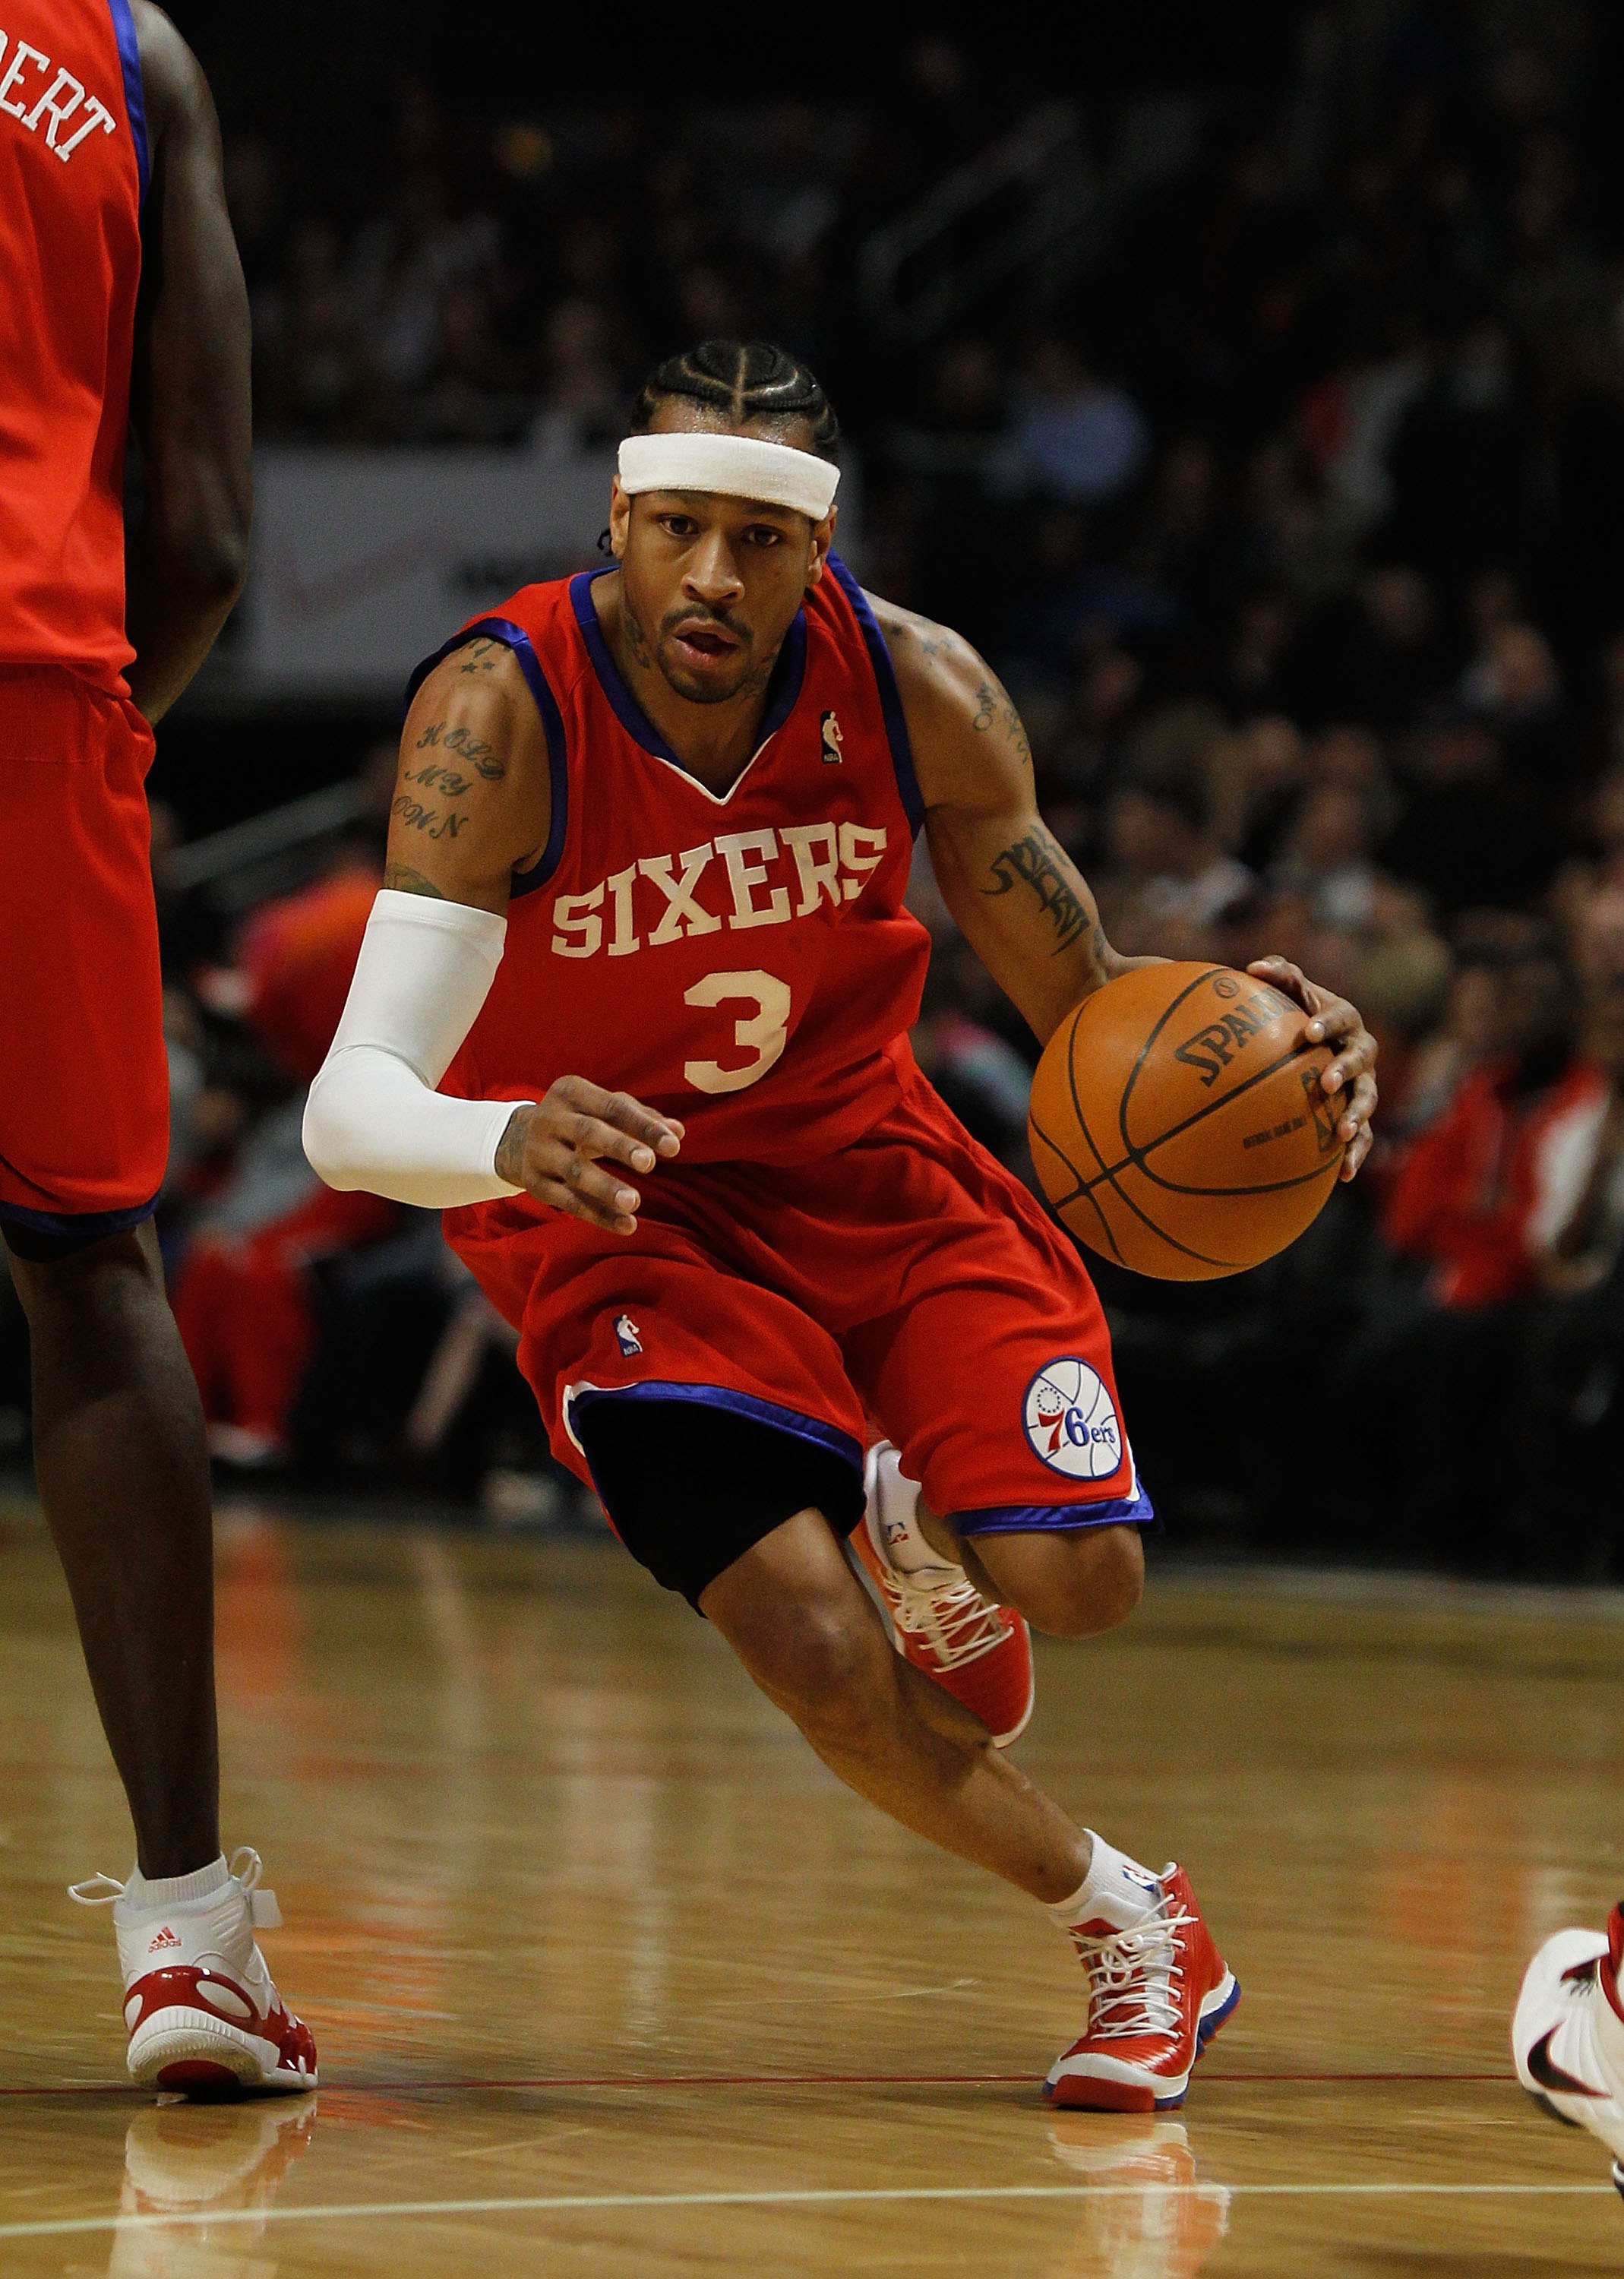 NBA 75: At No. 40, Allen Iverson brought heart, hustle and hip-hop